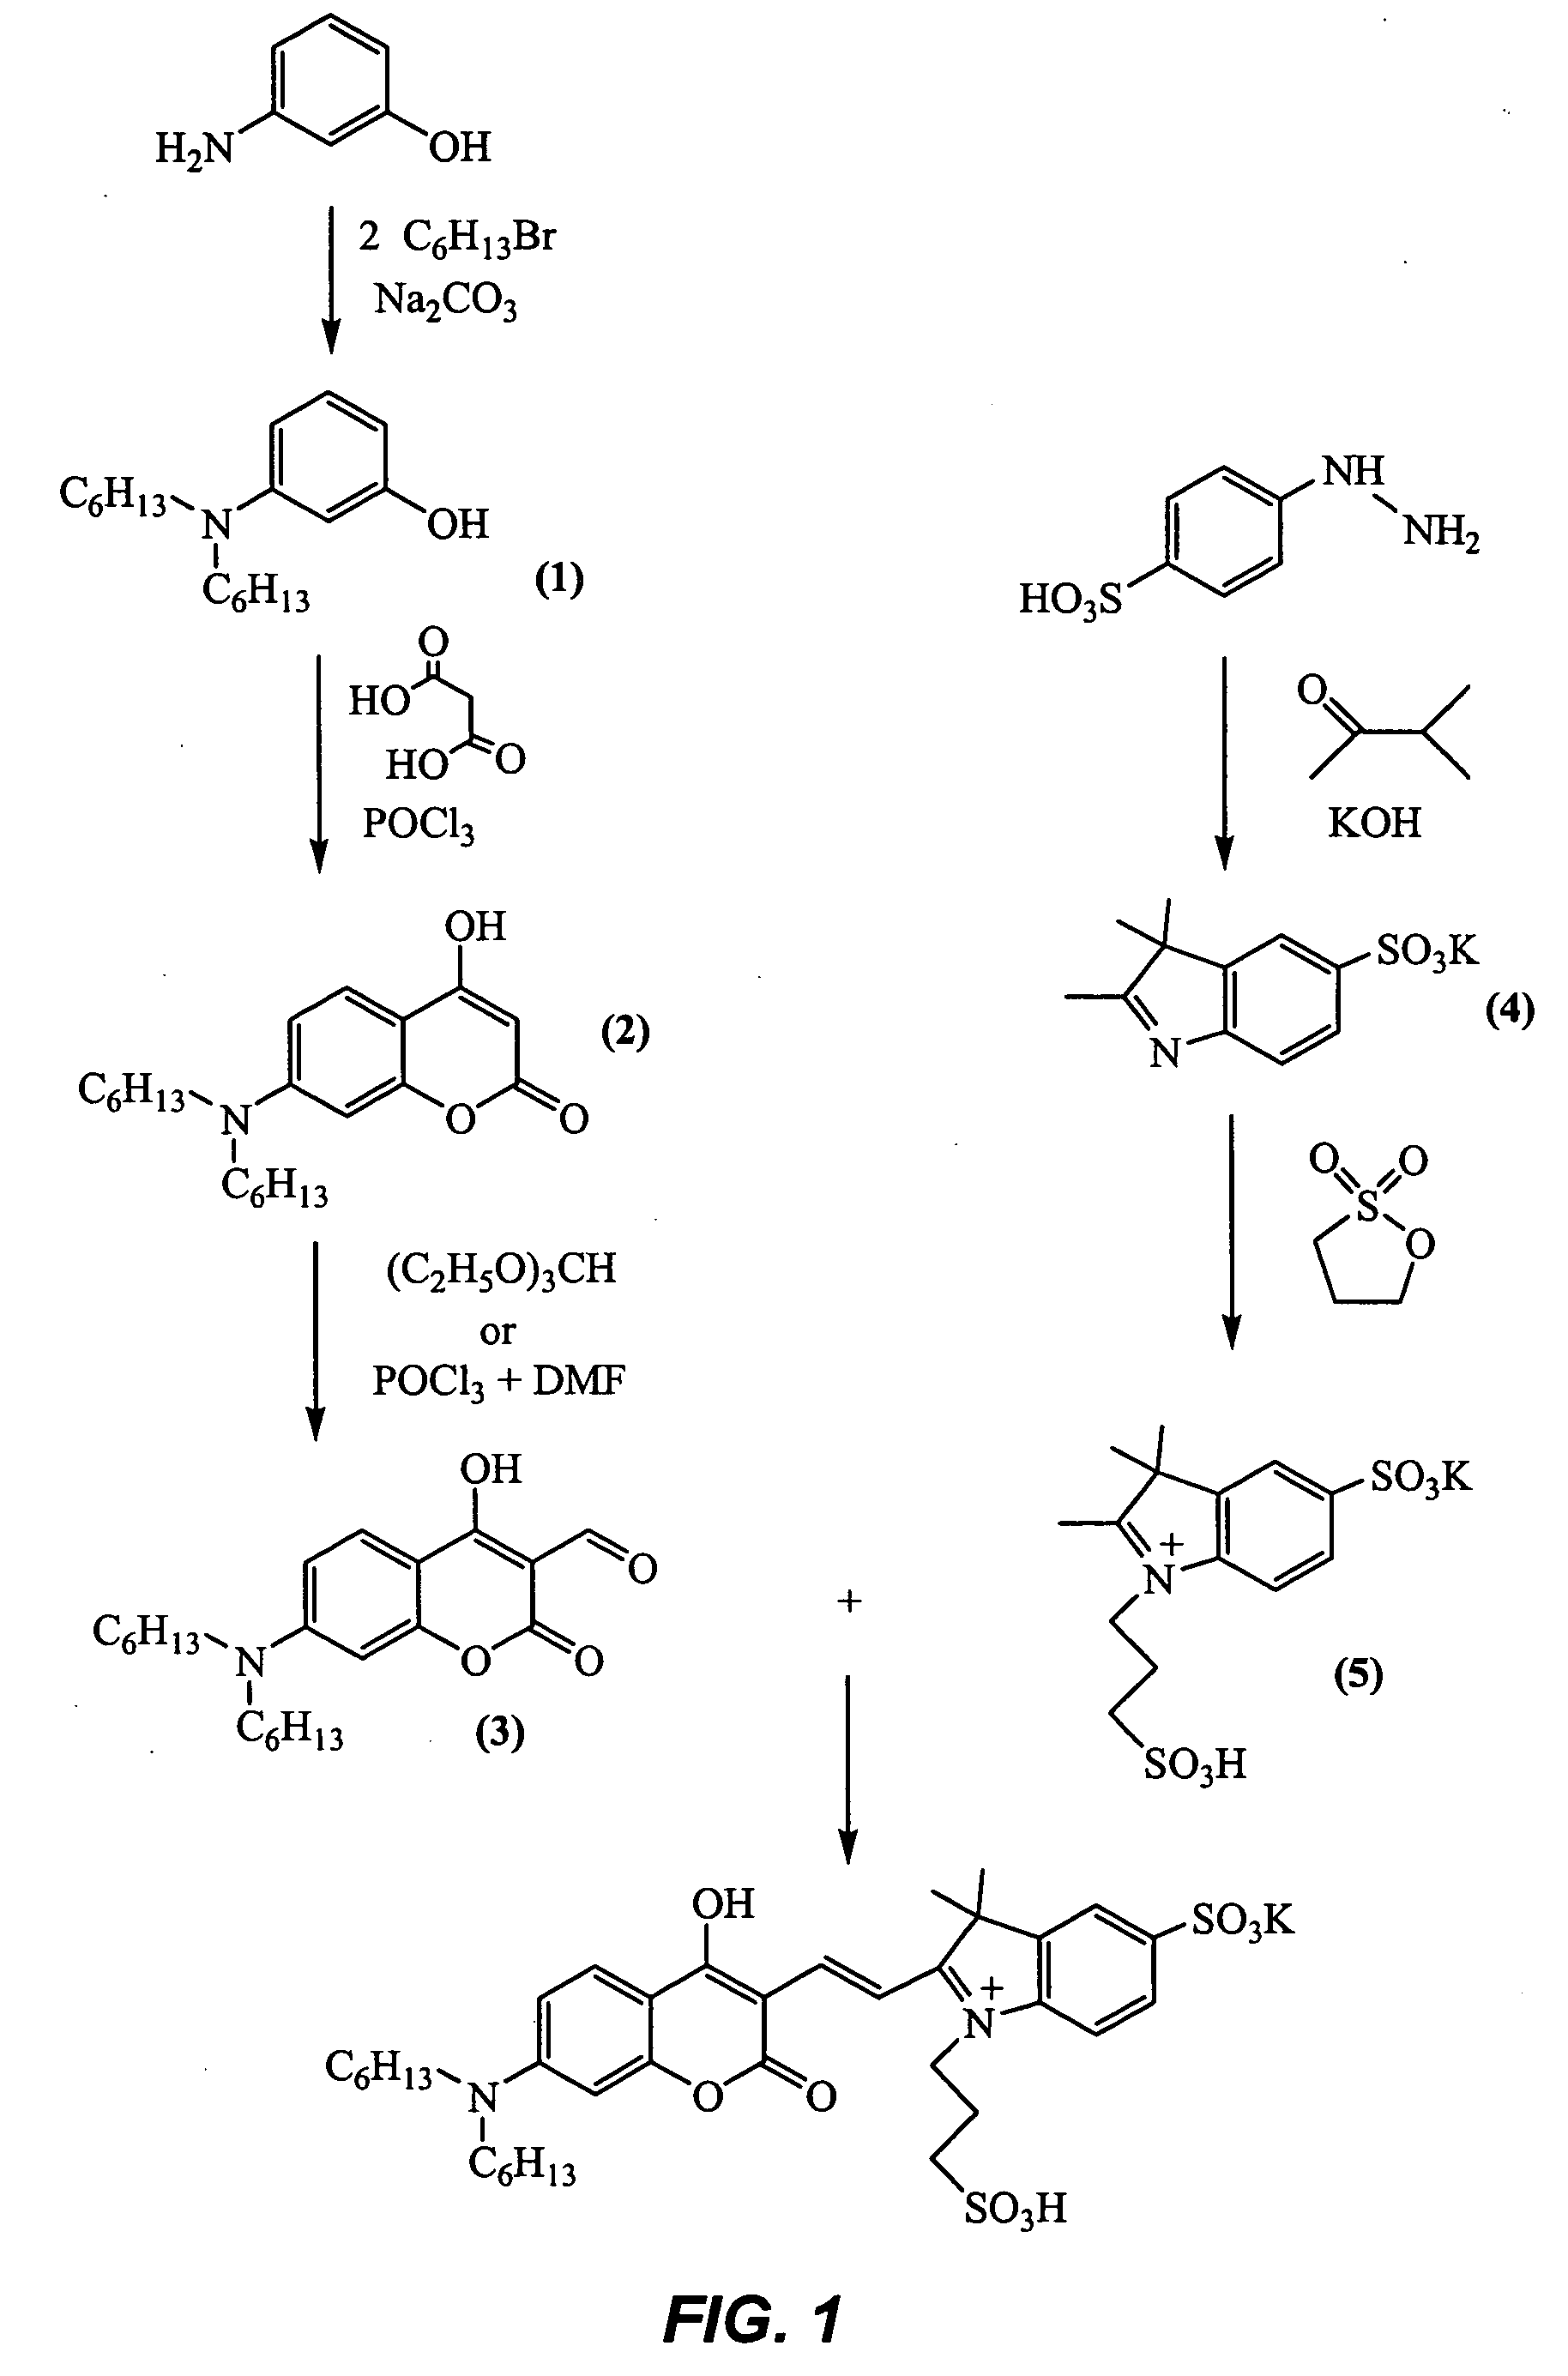 Coumarin-based cyanine dyes for non-specific protein binding